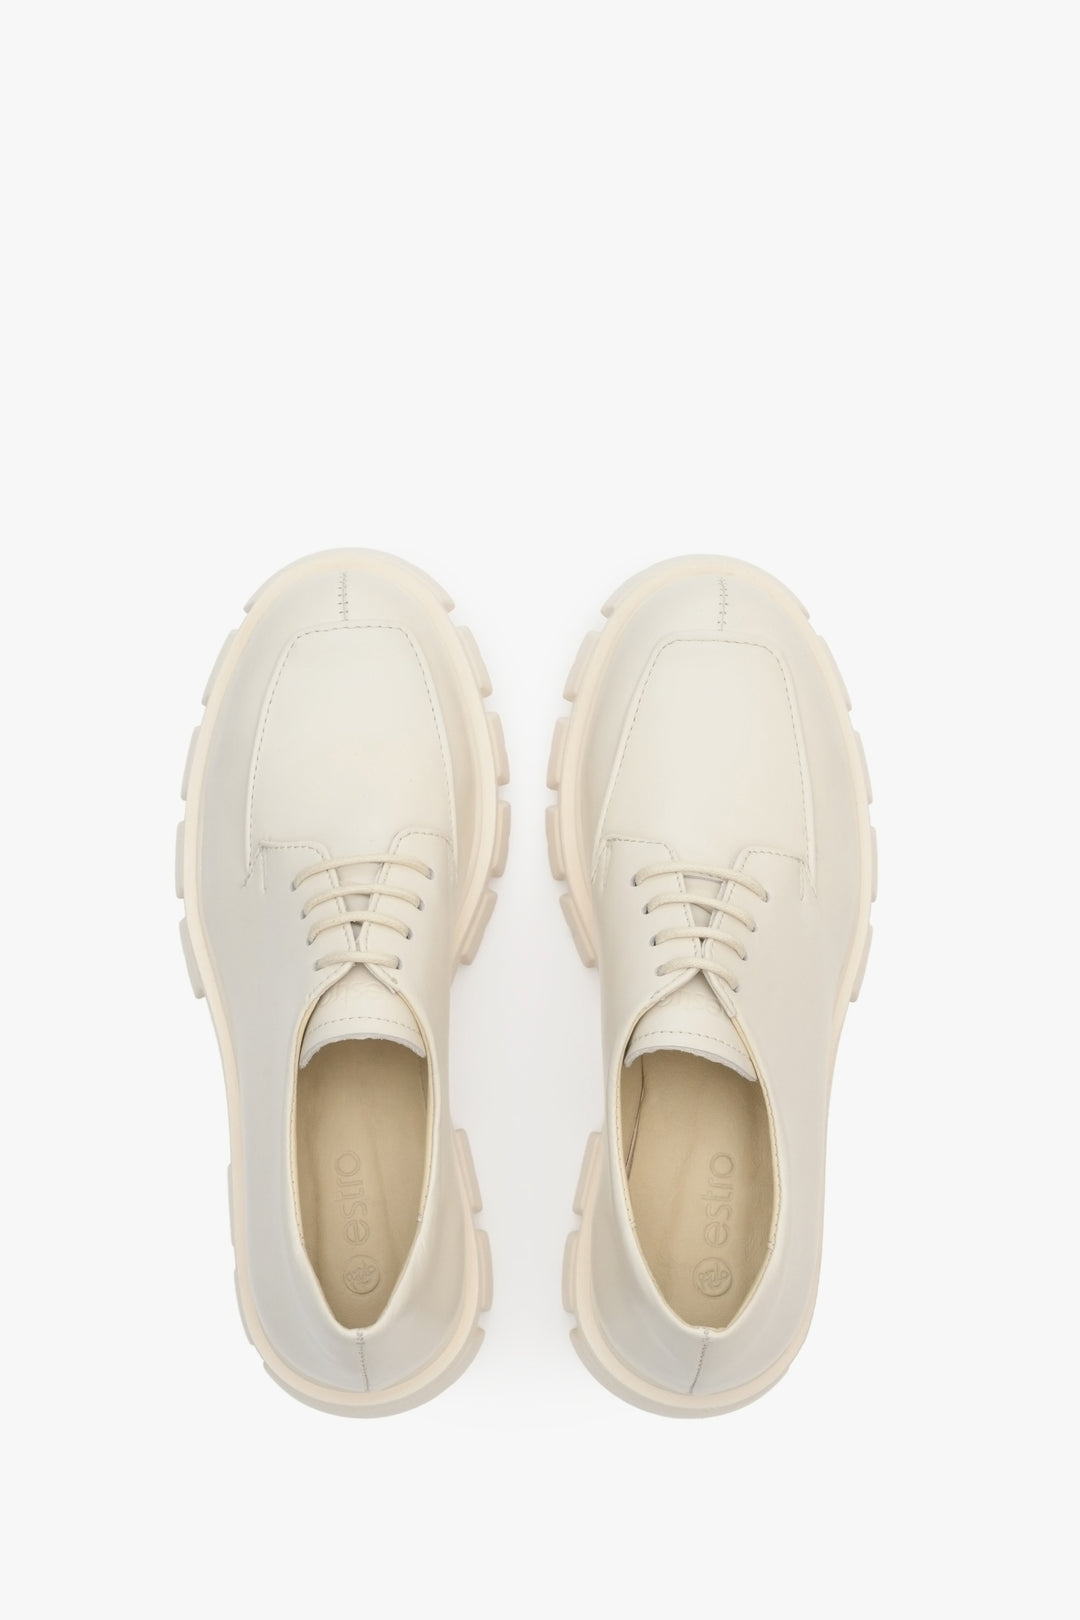 Lace-up women's leather shoes in beige - top view presentation of the footwear.